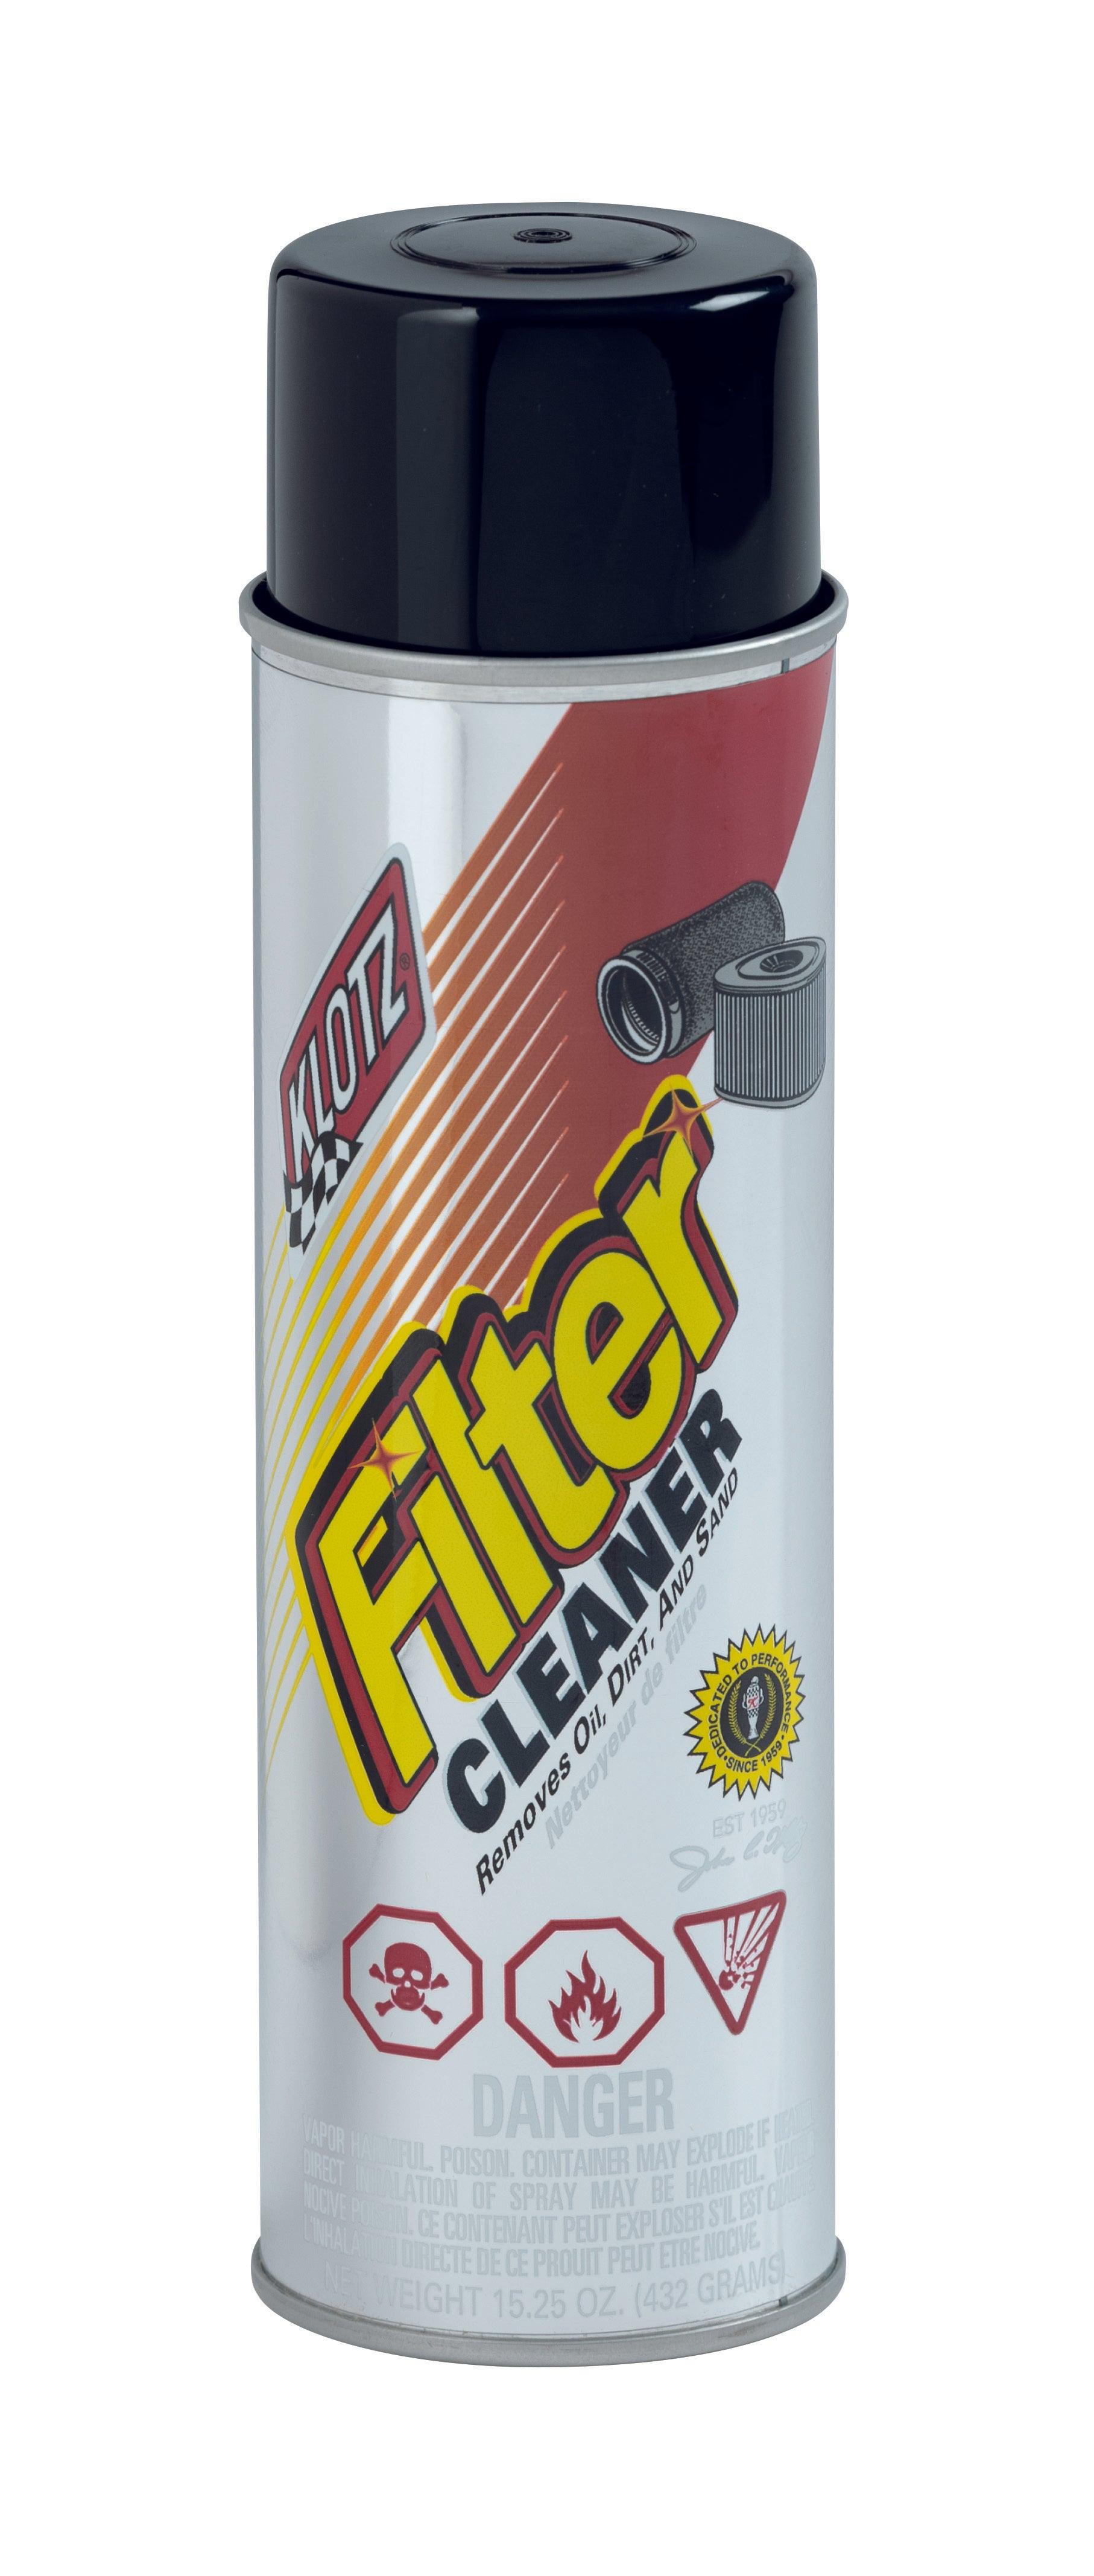 Filter Cleaner 15.25 Ounces - Burlile Performance Products